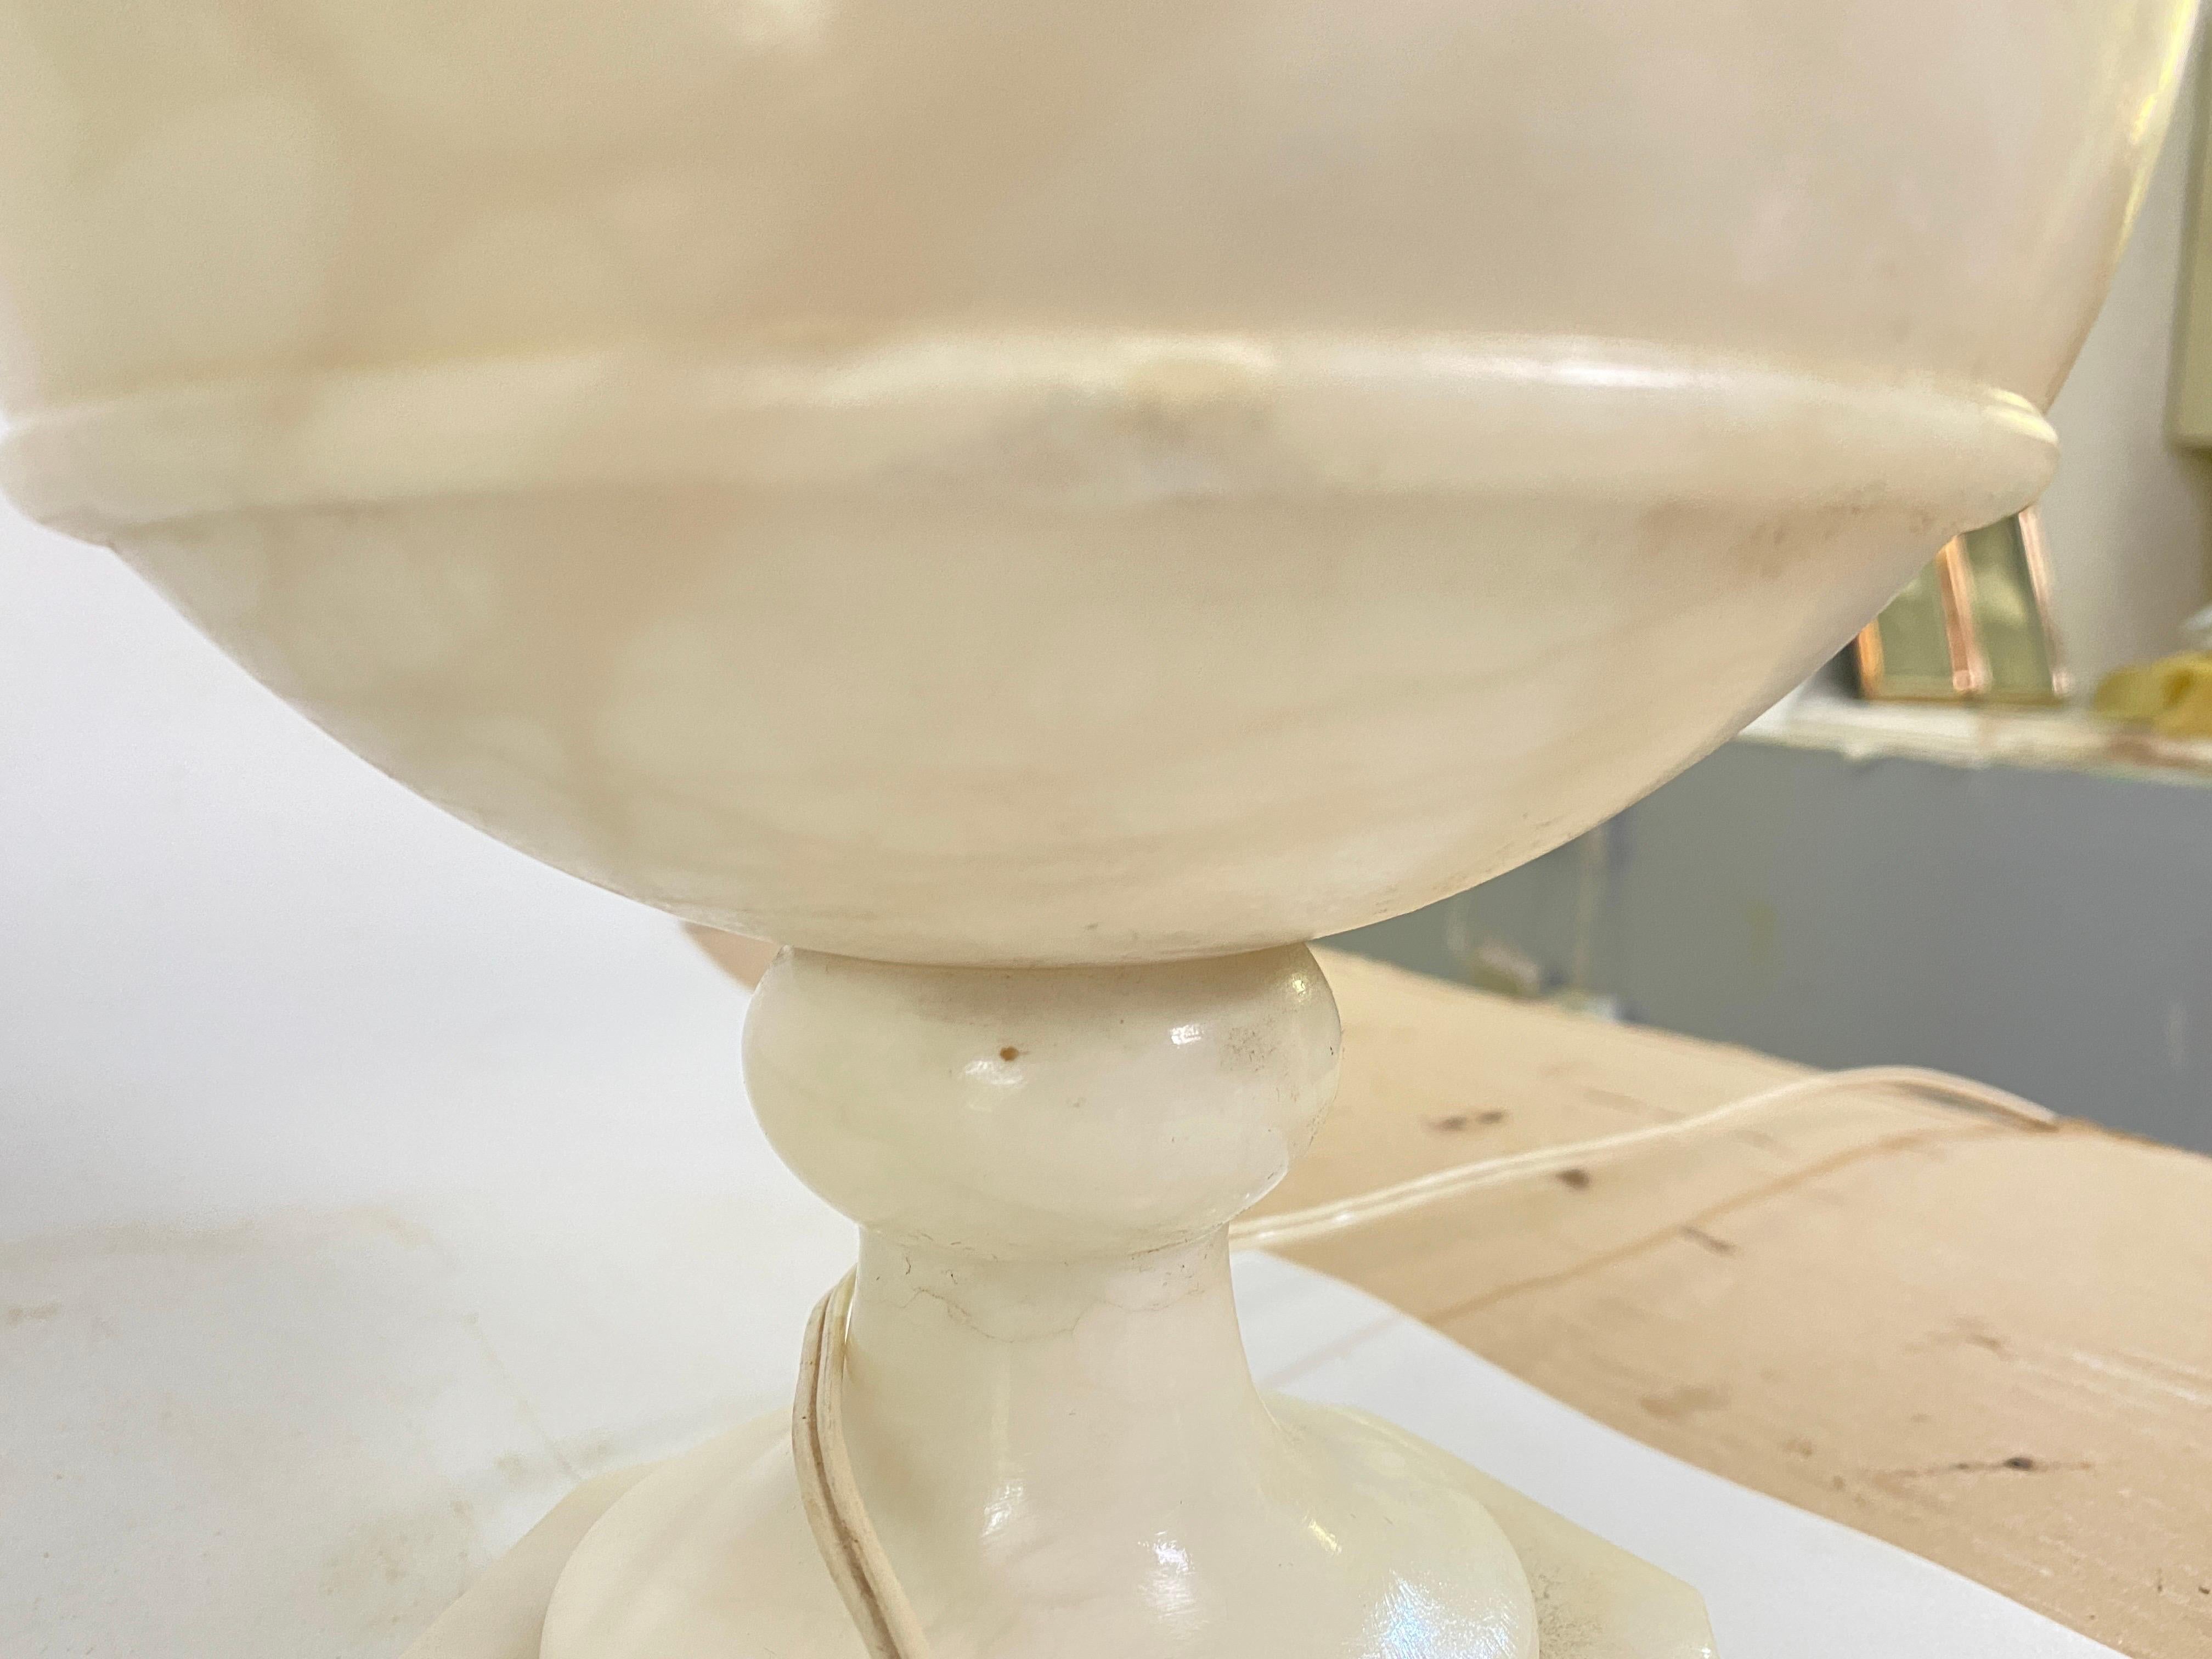 Neoclassical Art Deco Alabaster Urn Uplighter Table Lamp, White Color France, circa 1960 For Sale